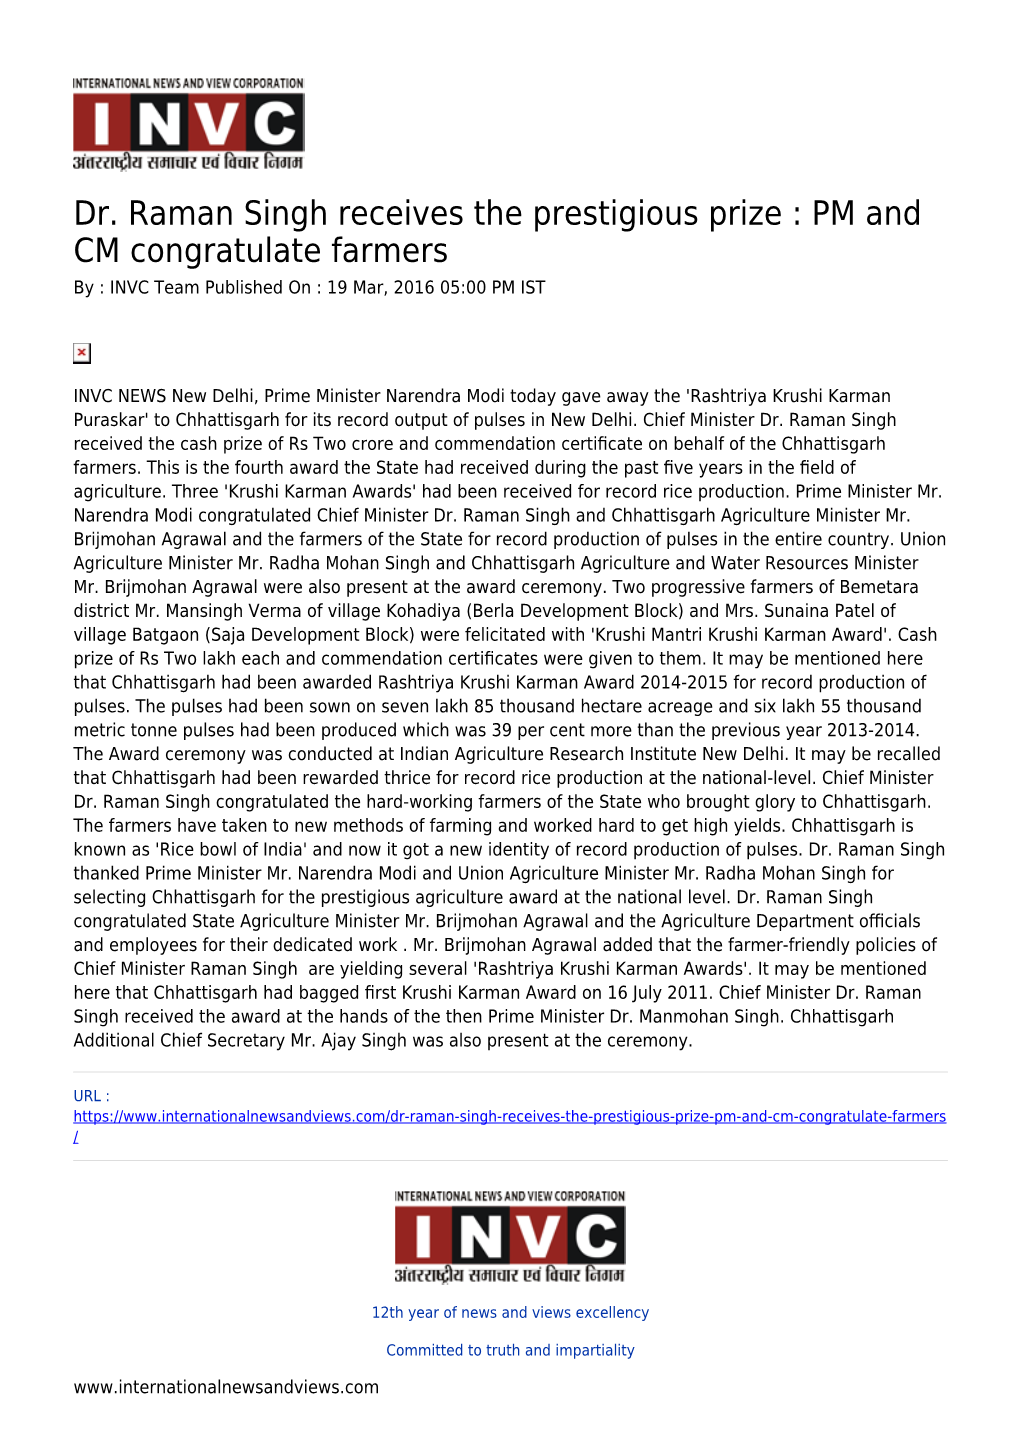 Dr. Raman Singh Receives the Prestigious Prize : PM and CM Congratulate Farmers by : INVC Team Published on : 19 Mar, 2016 05:00 PM IST